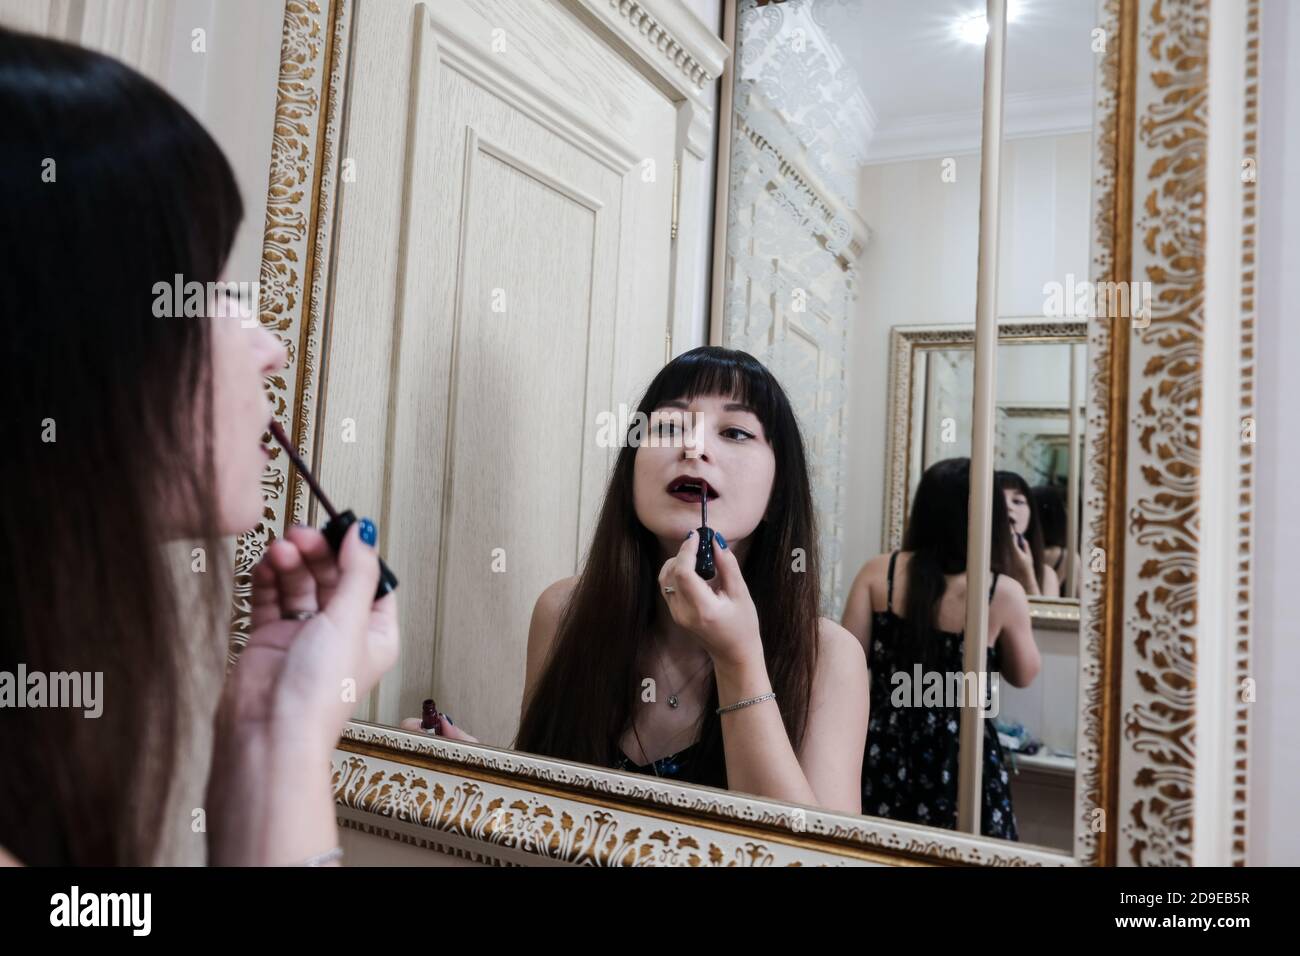 Young woman applying lipstick in front of a mirror. Girl getting ready with her makeup in a hotel bathroom. Pretty female painting lips Stock Photo